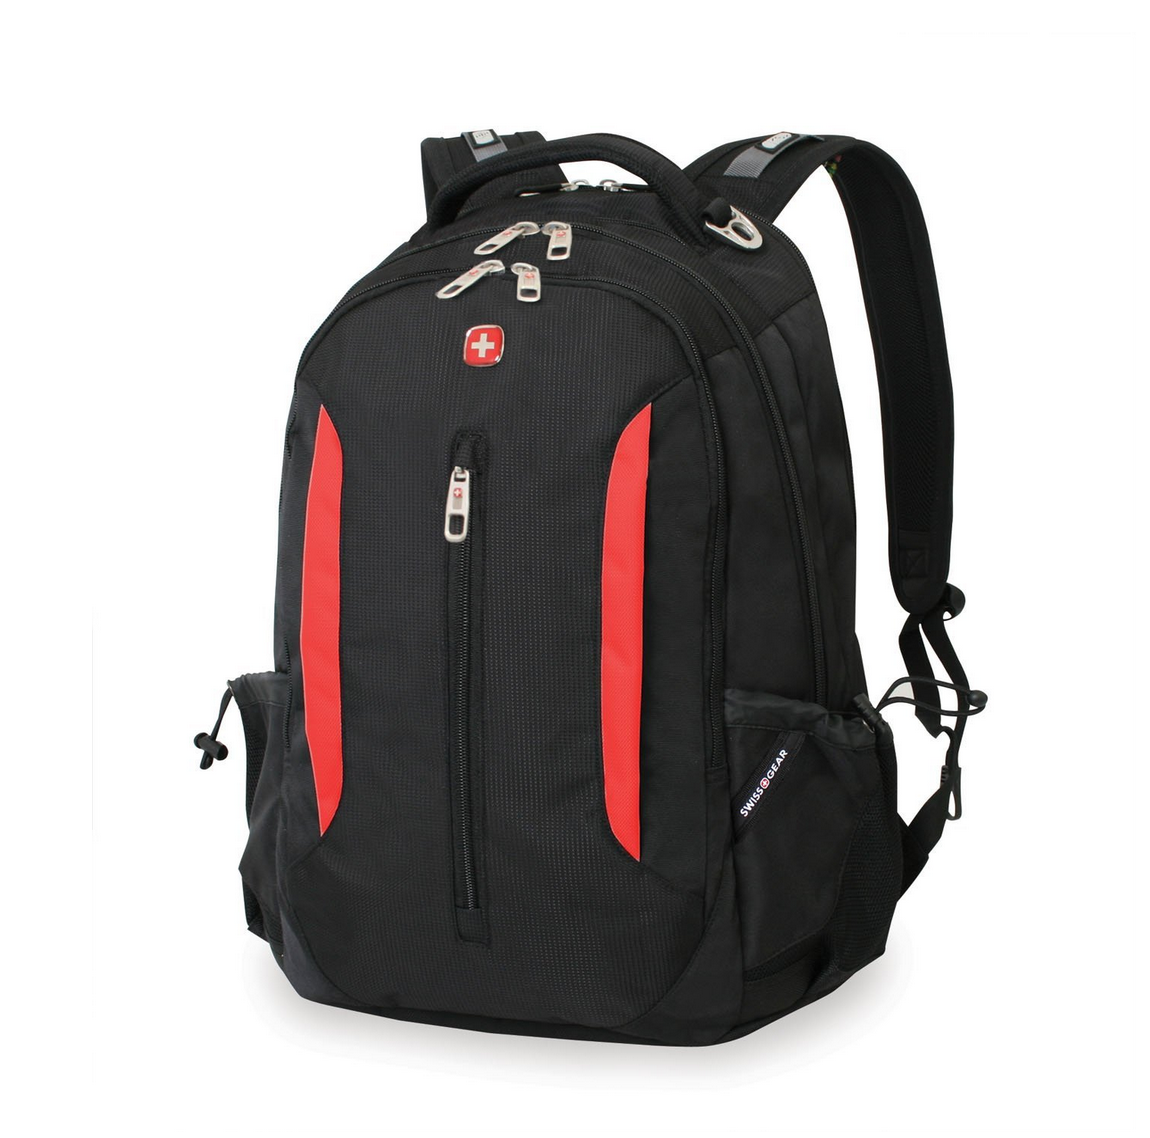 Up to 73% Off SwissGear Backpacks!